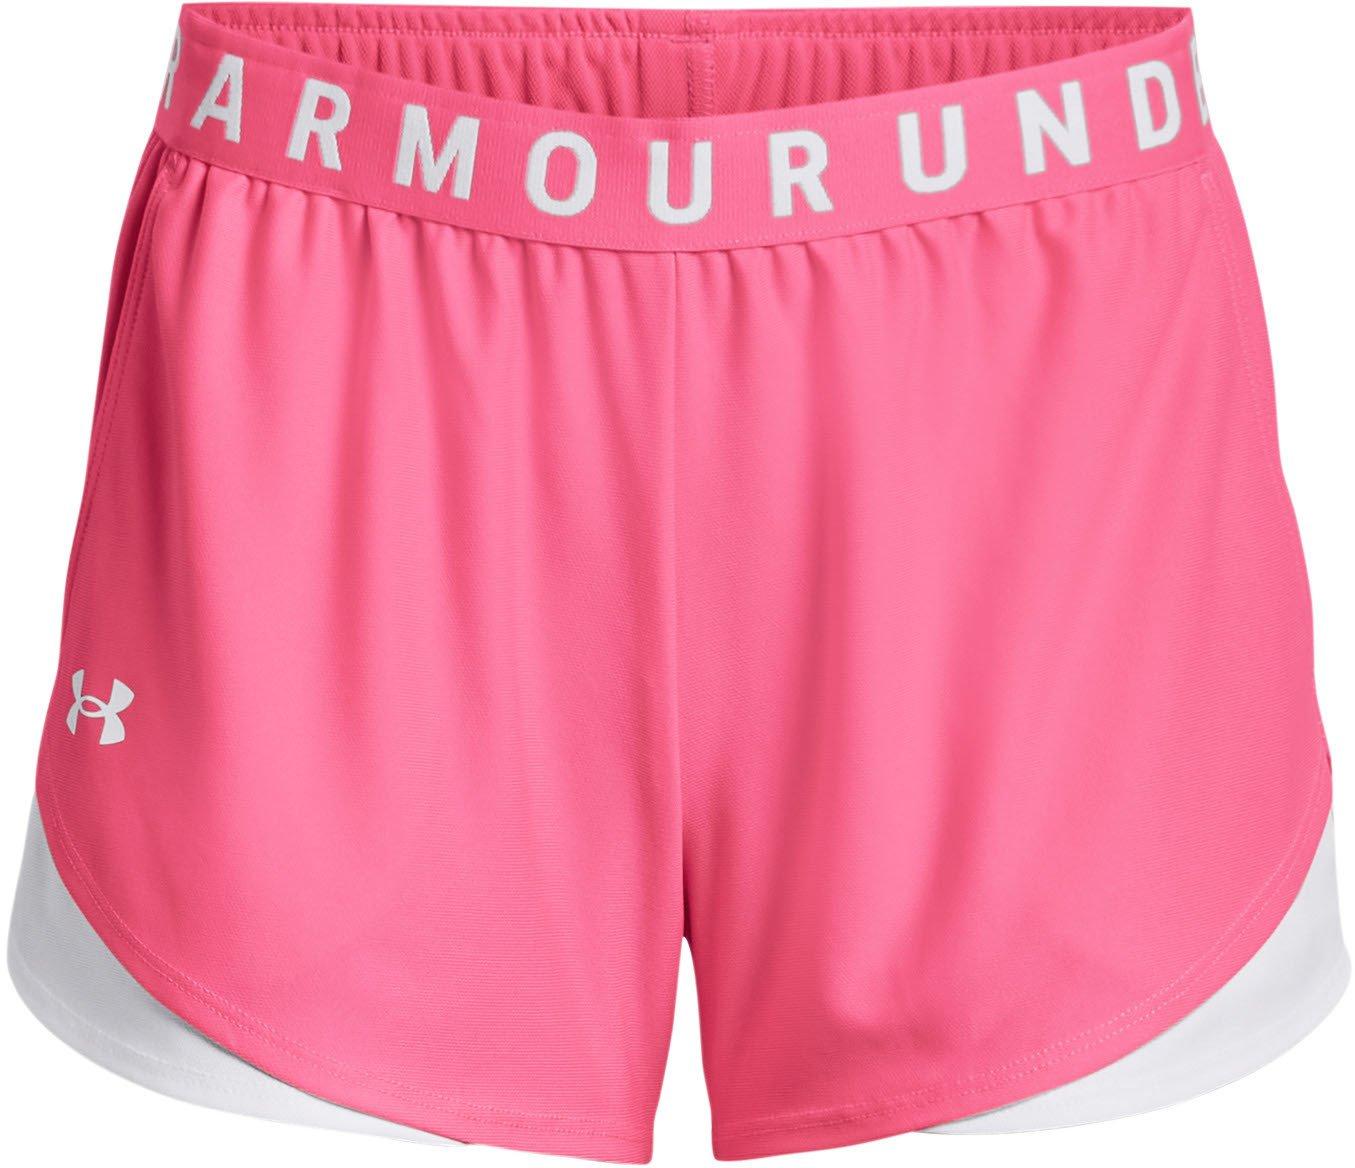 Under Armour Play Up Shorts 3.0 L